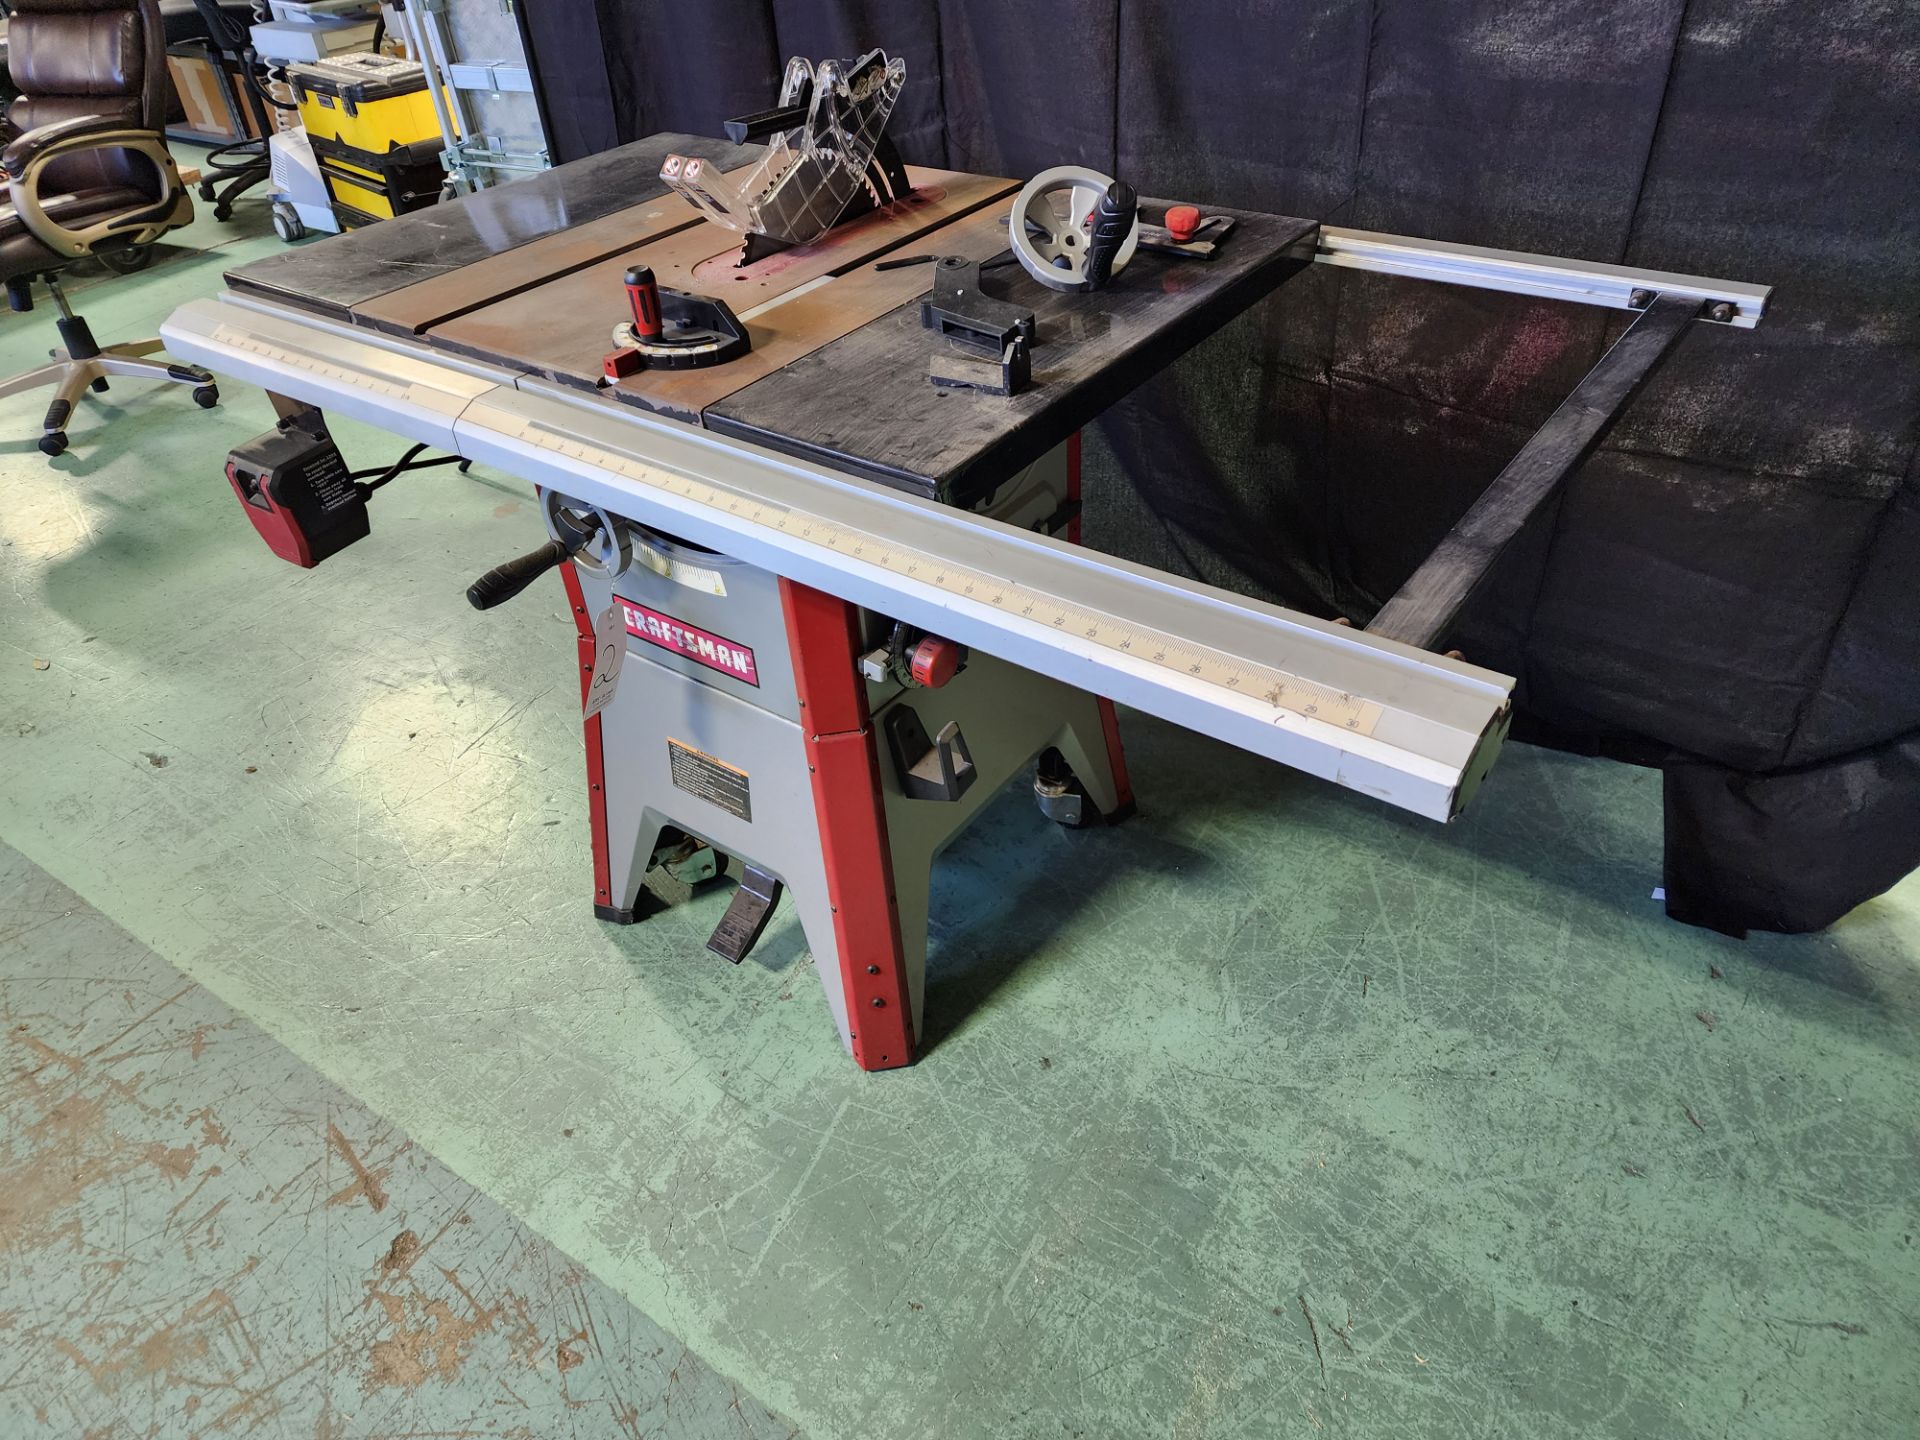 Craftsman Model 351.218331 10" Table Saw, S/N 201306 (2013) - Image 3 of 9